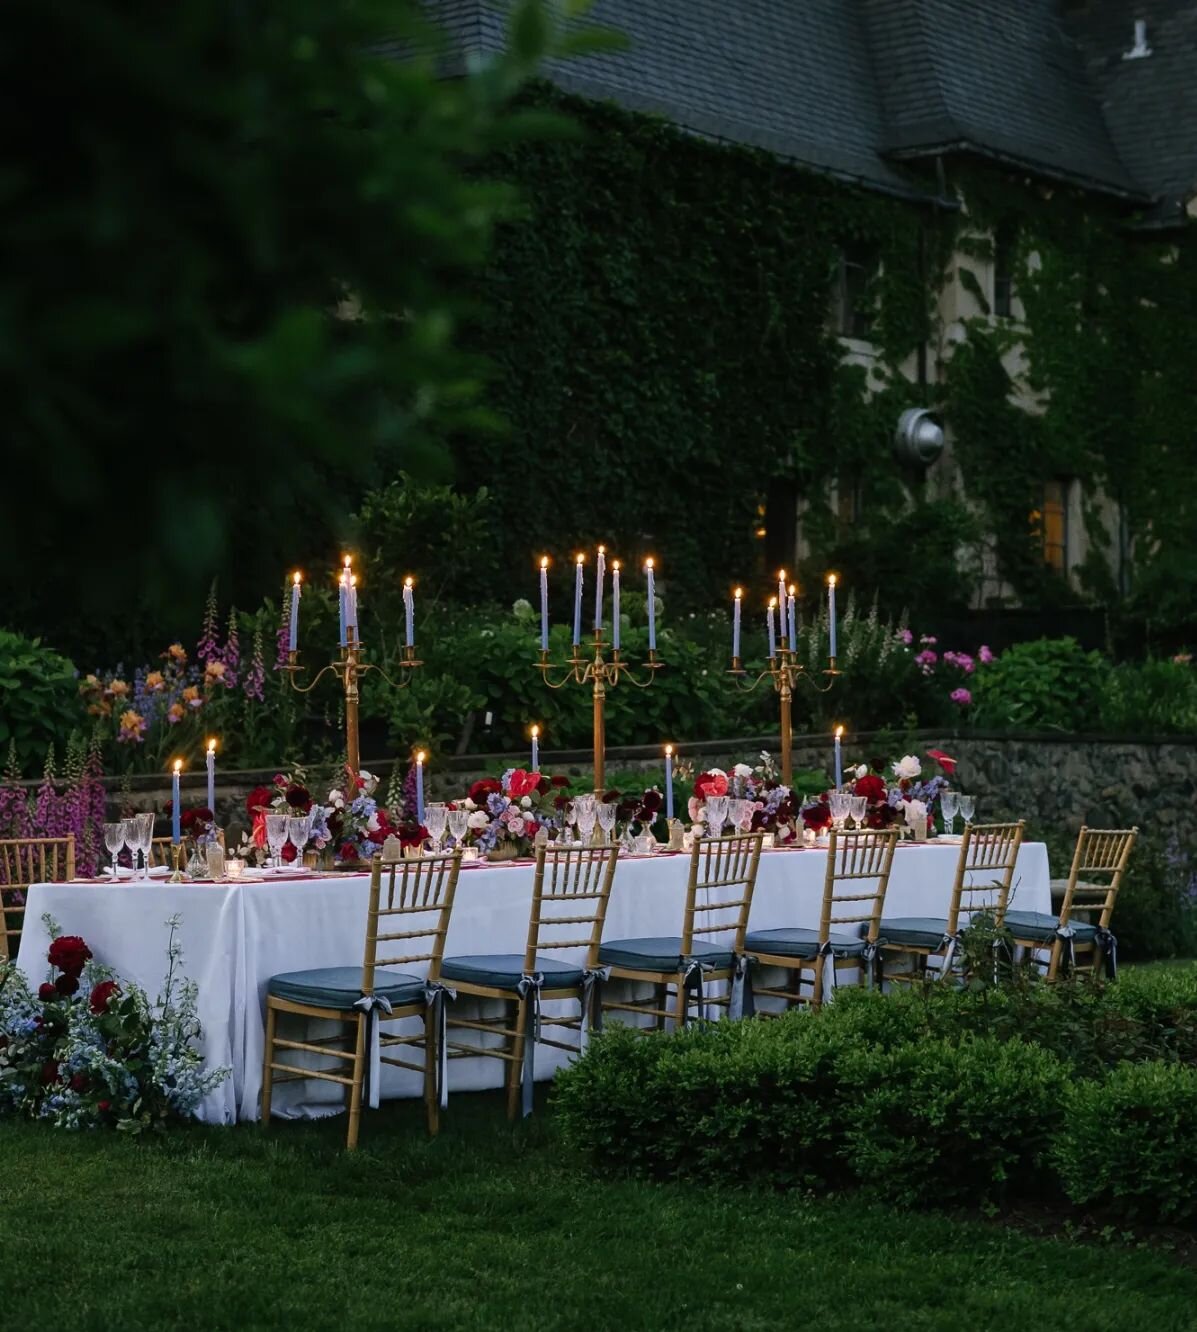 This photo deserved a spotlight on the feed.

I absolutely love a candlelit reception, and the gardens at @greencrest_manor make it even more magical.